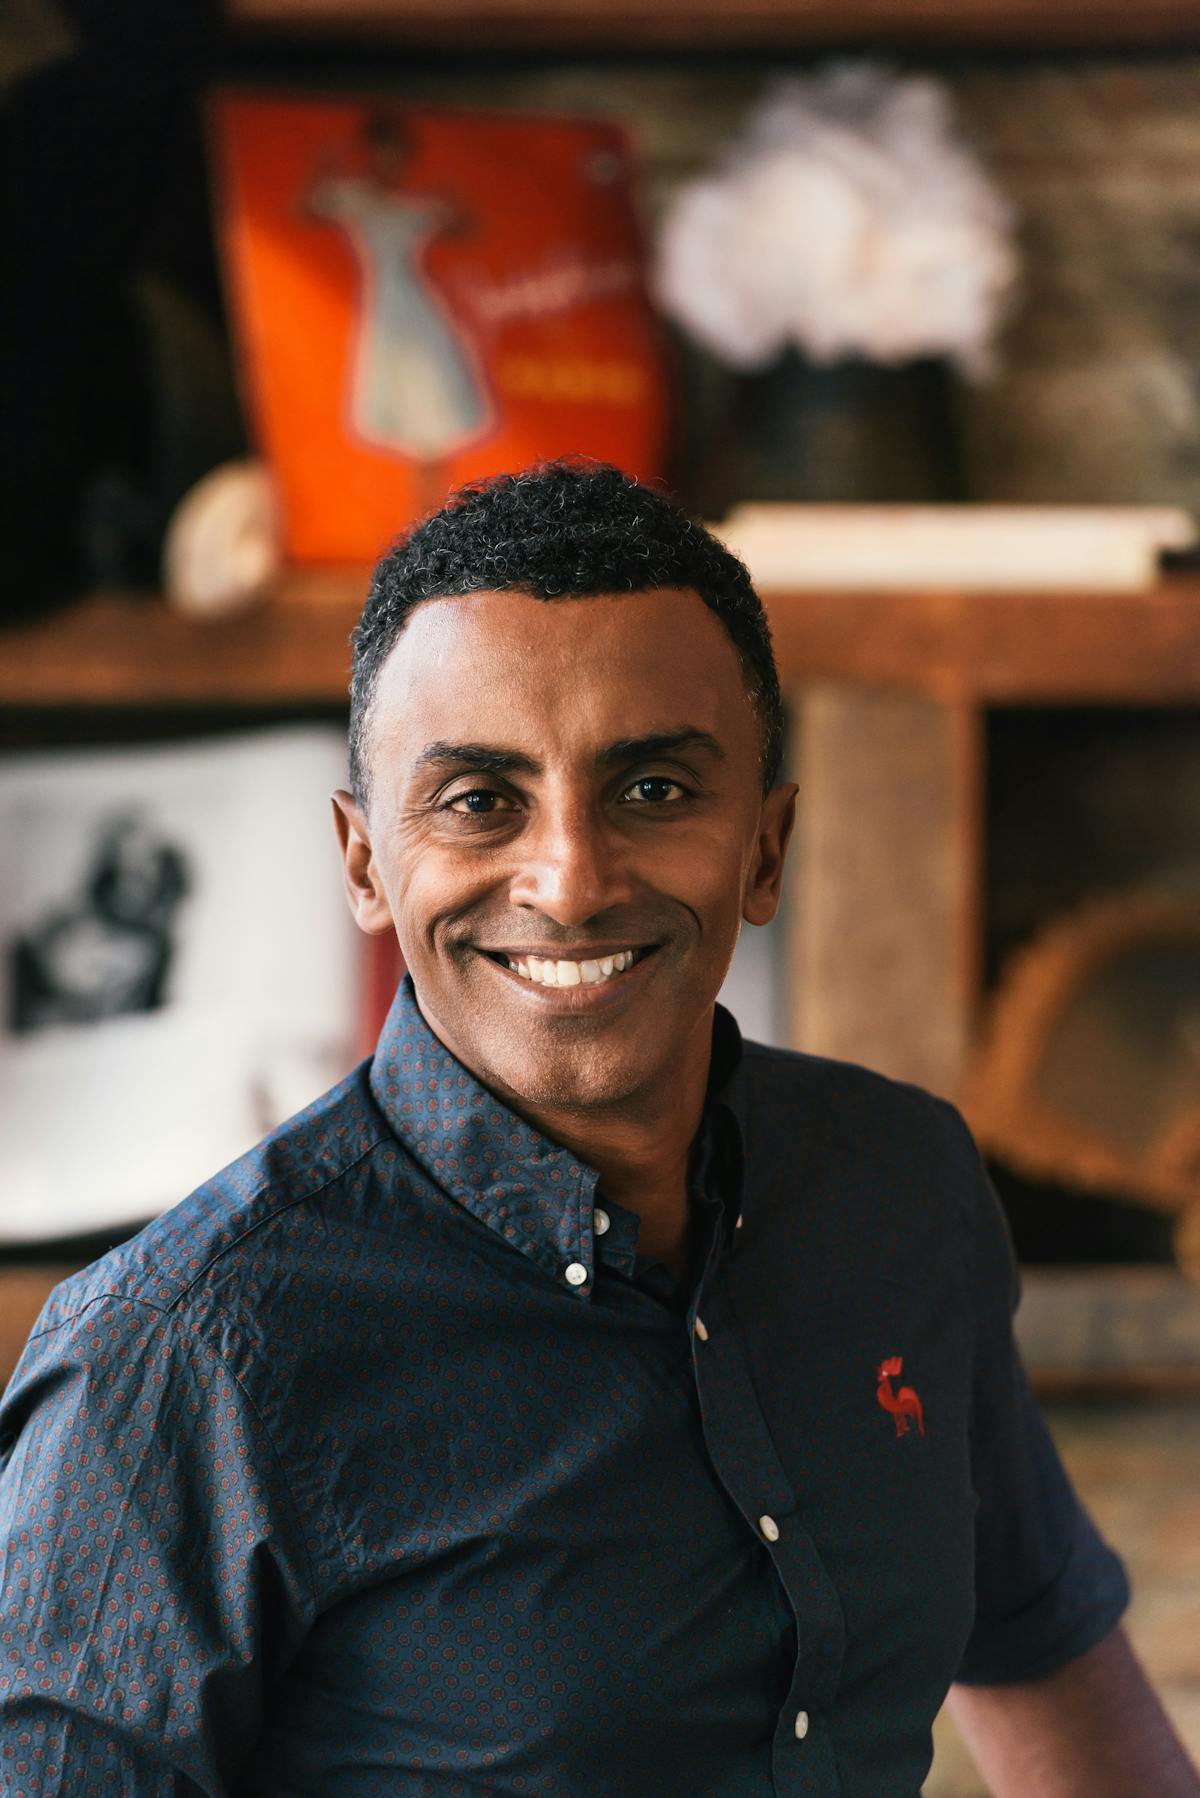 Marcus Samuelsson wearing glasses and smiling at the camera